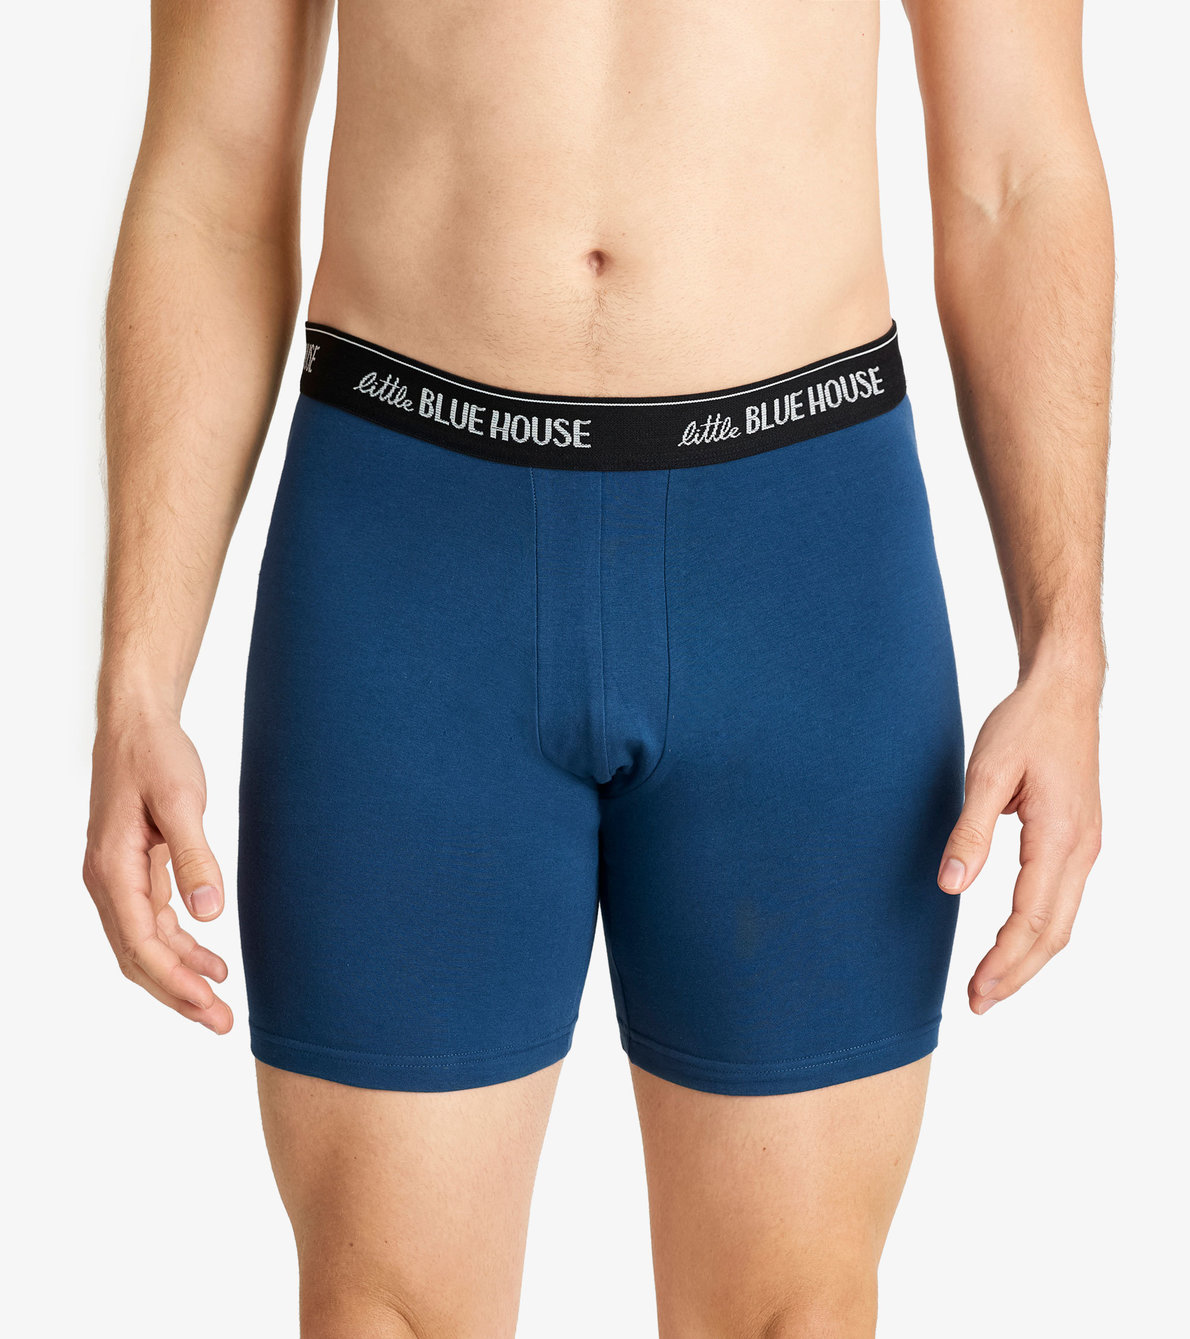 View larger image of Gone Fishing Men's Boxer Briefs